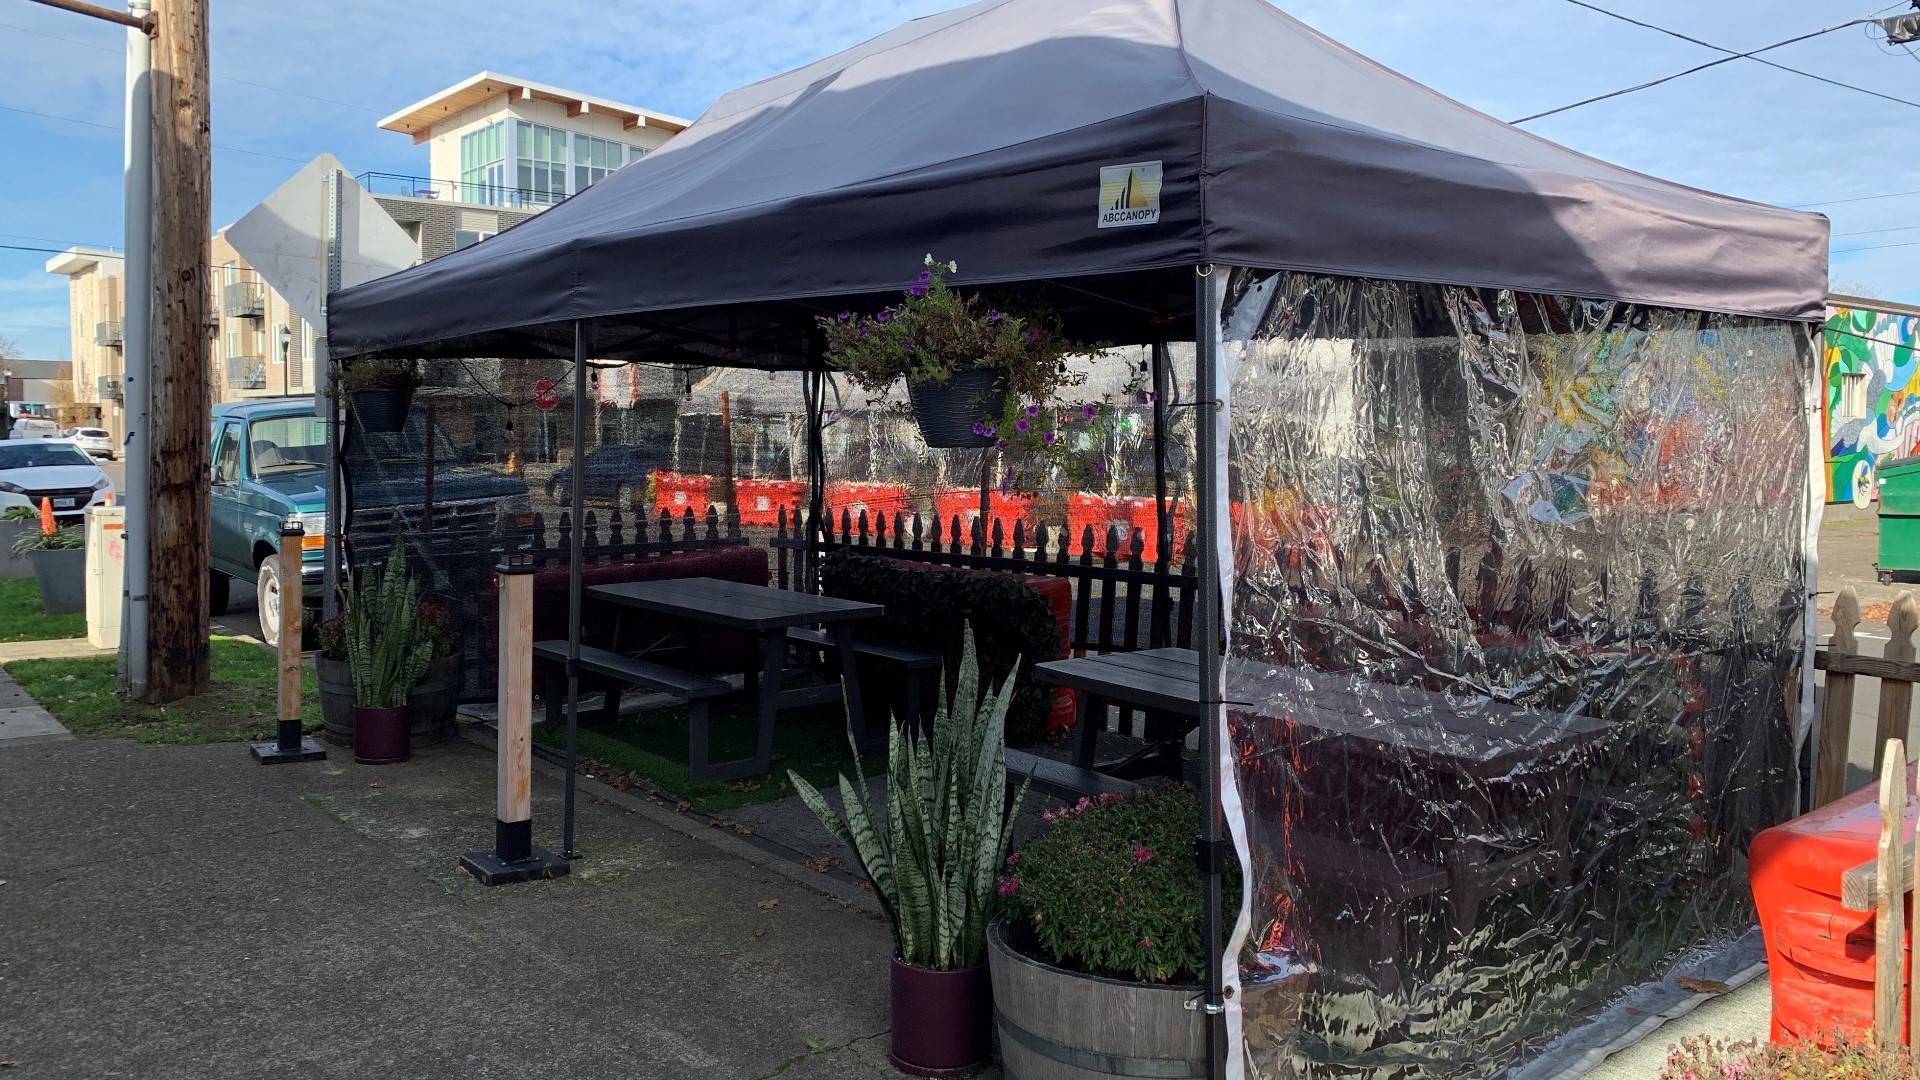 Outdoor dining helped many pivot during the pandemic, but some bars and restaurants say getting their outdoor structures up to permanent code will be costly.